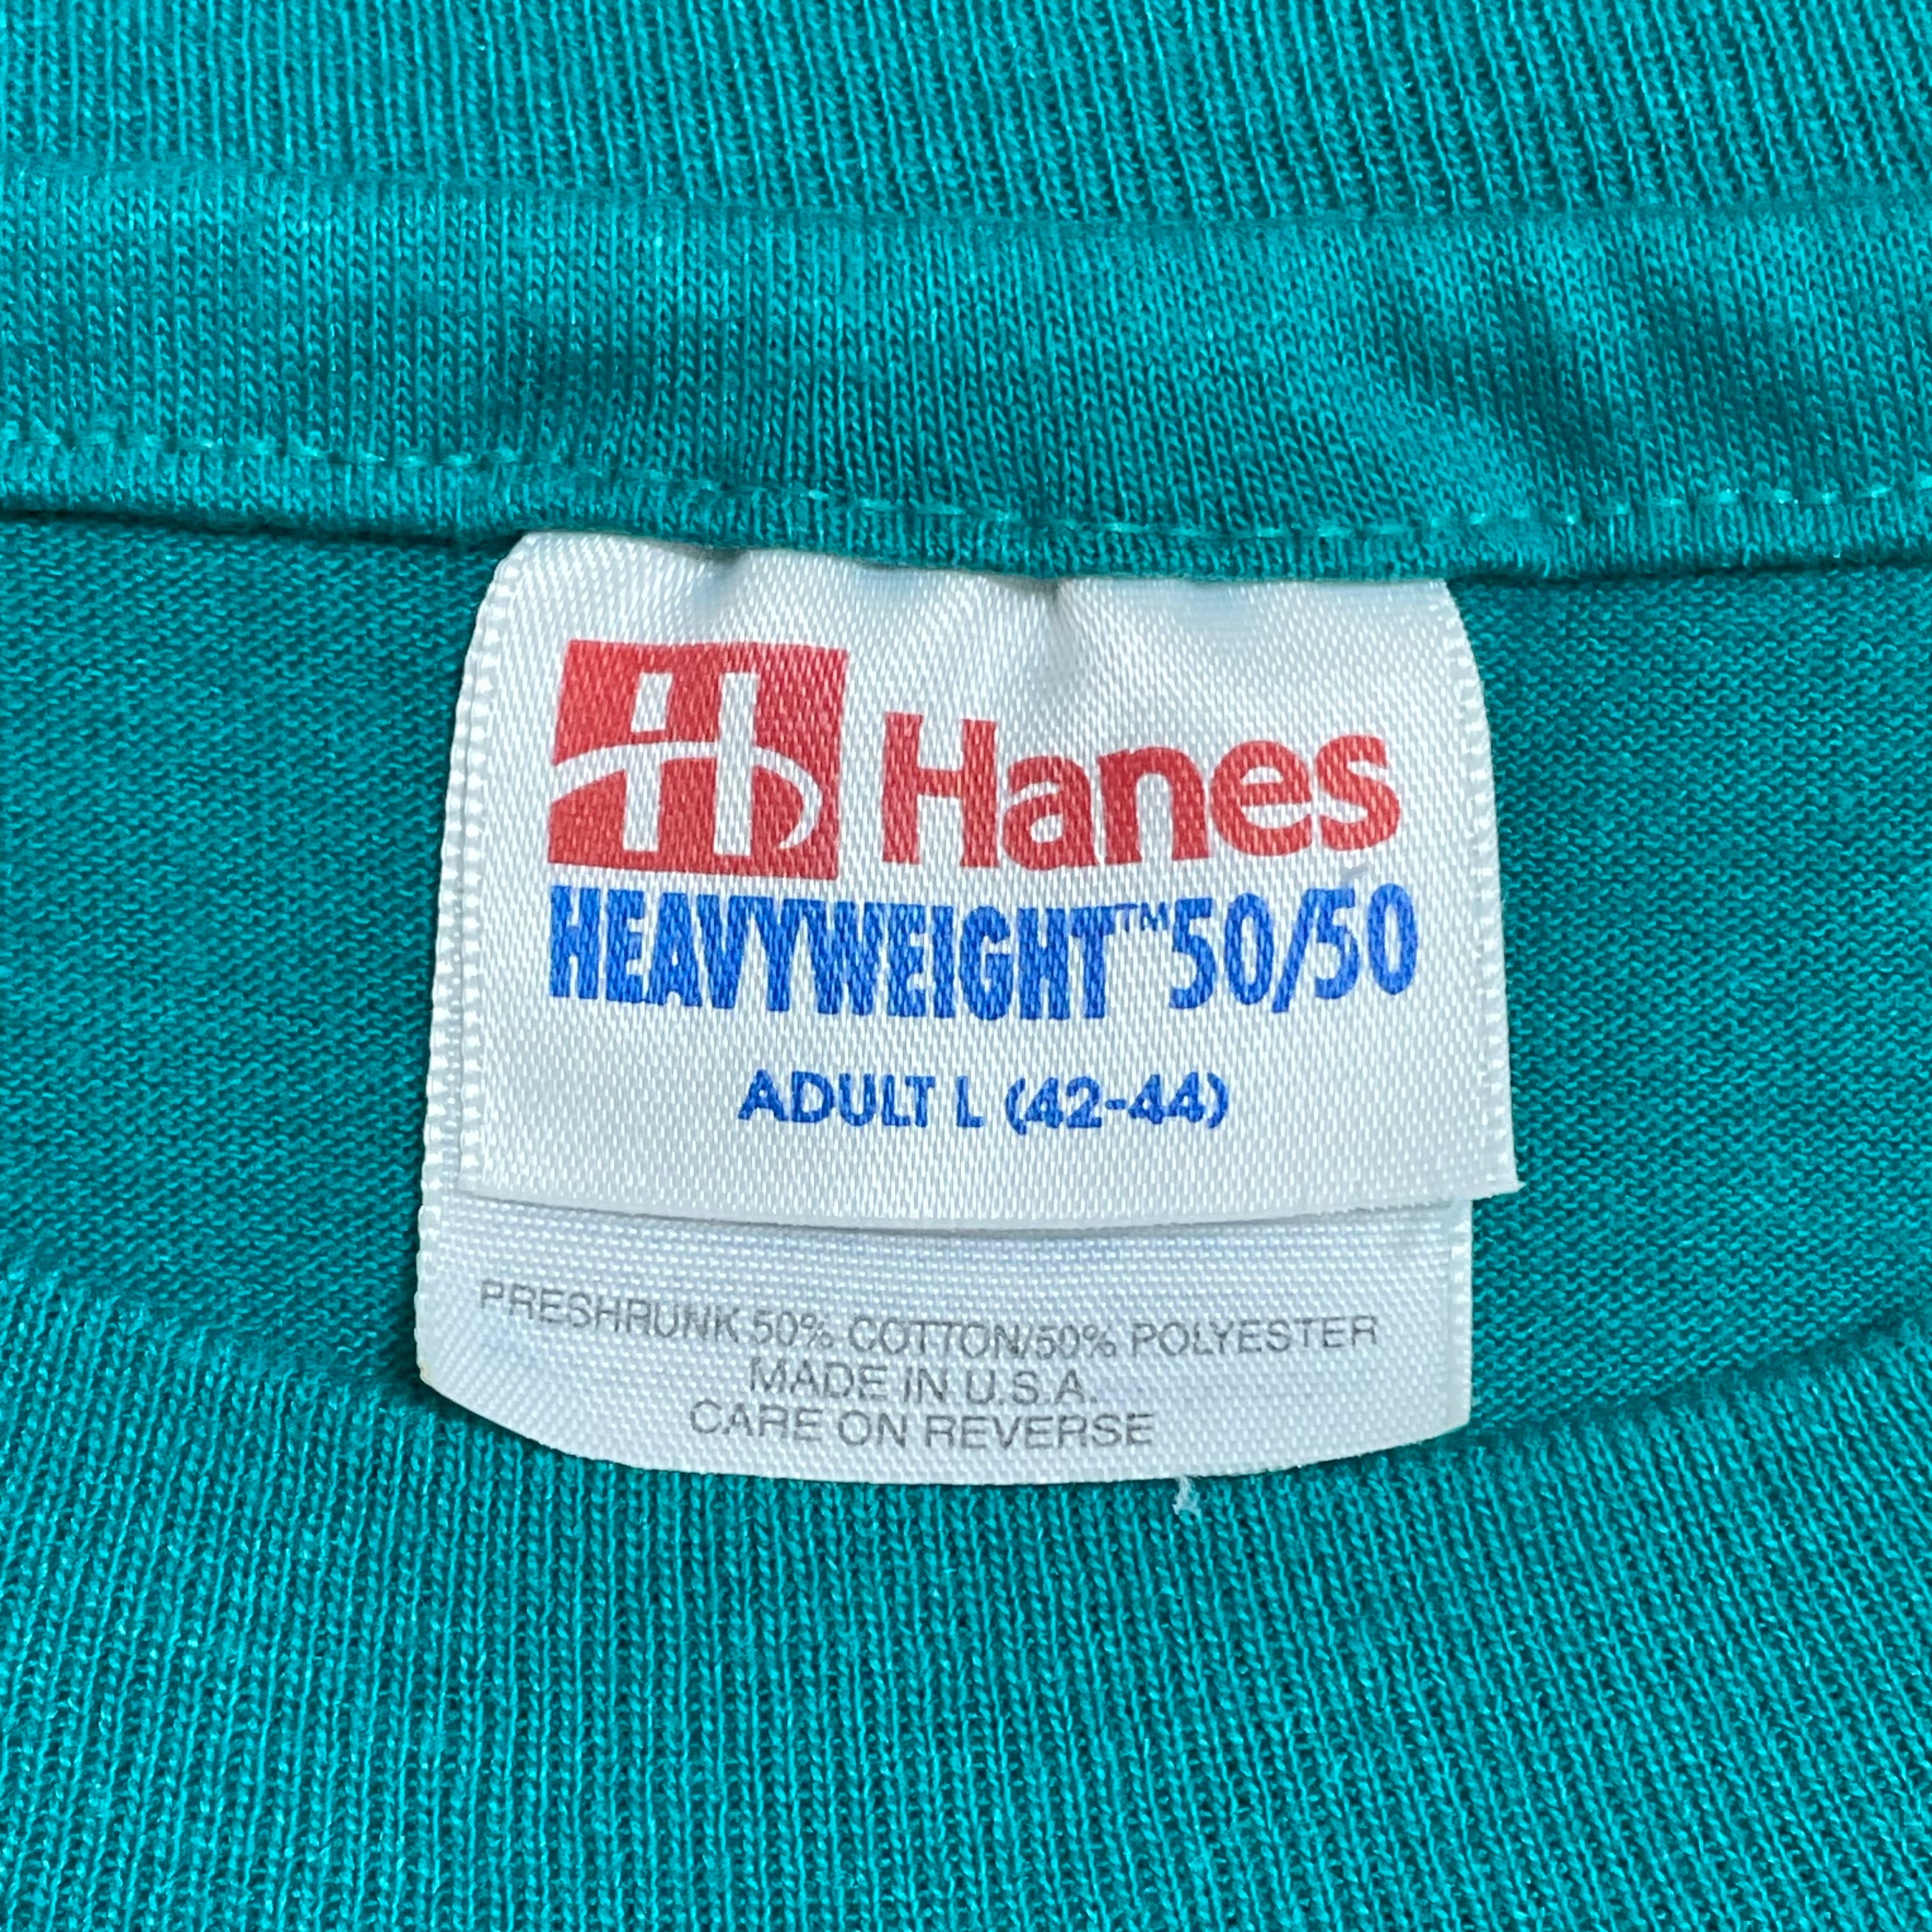 HANES】90s USA製 Tシャツ シングルステッチ テニス プリントロゴ ...